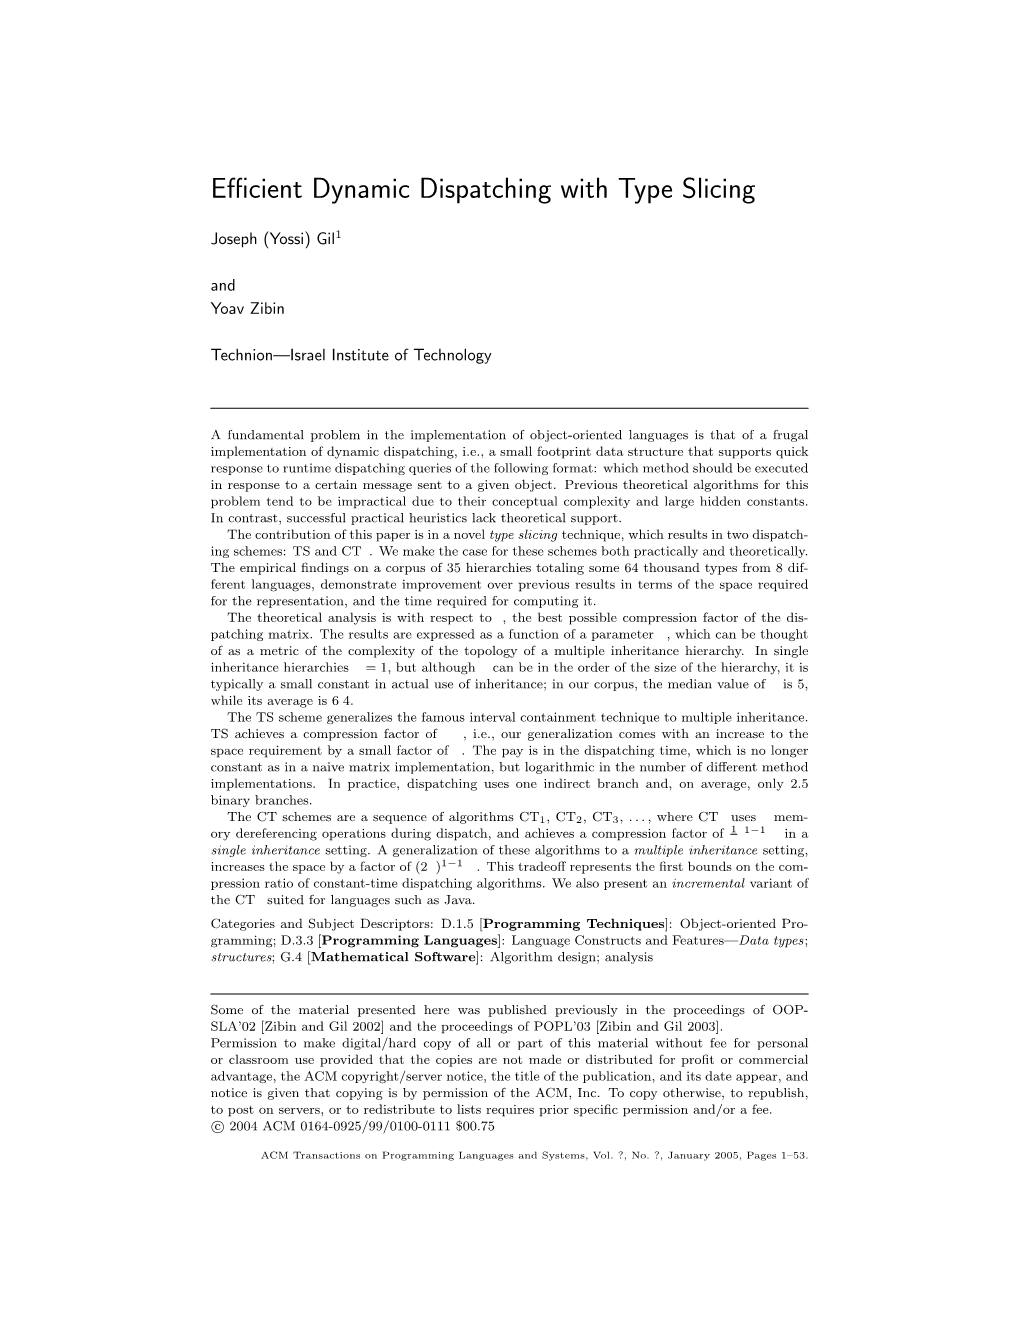 Efficient Dynamic Dispatching with Type Slicing